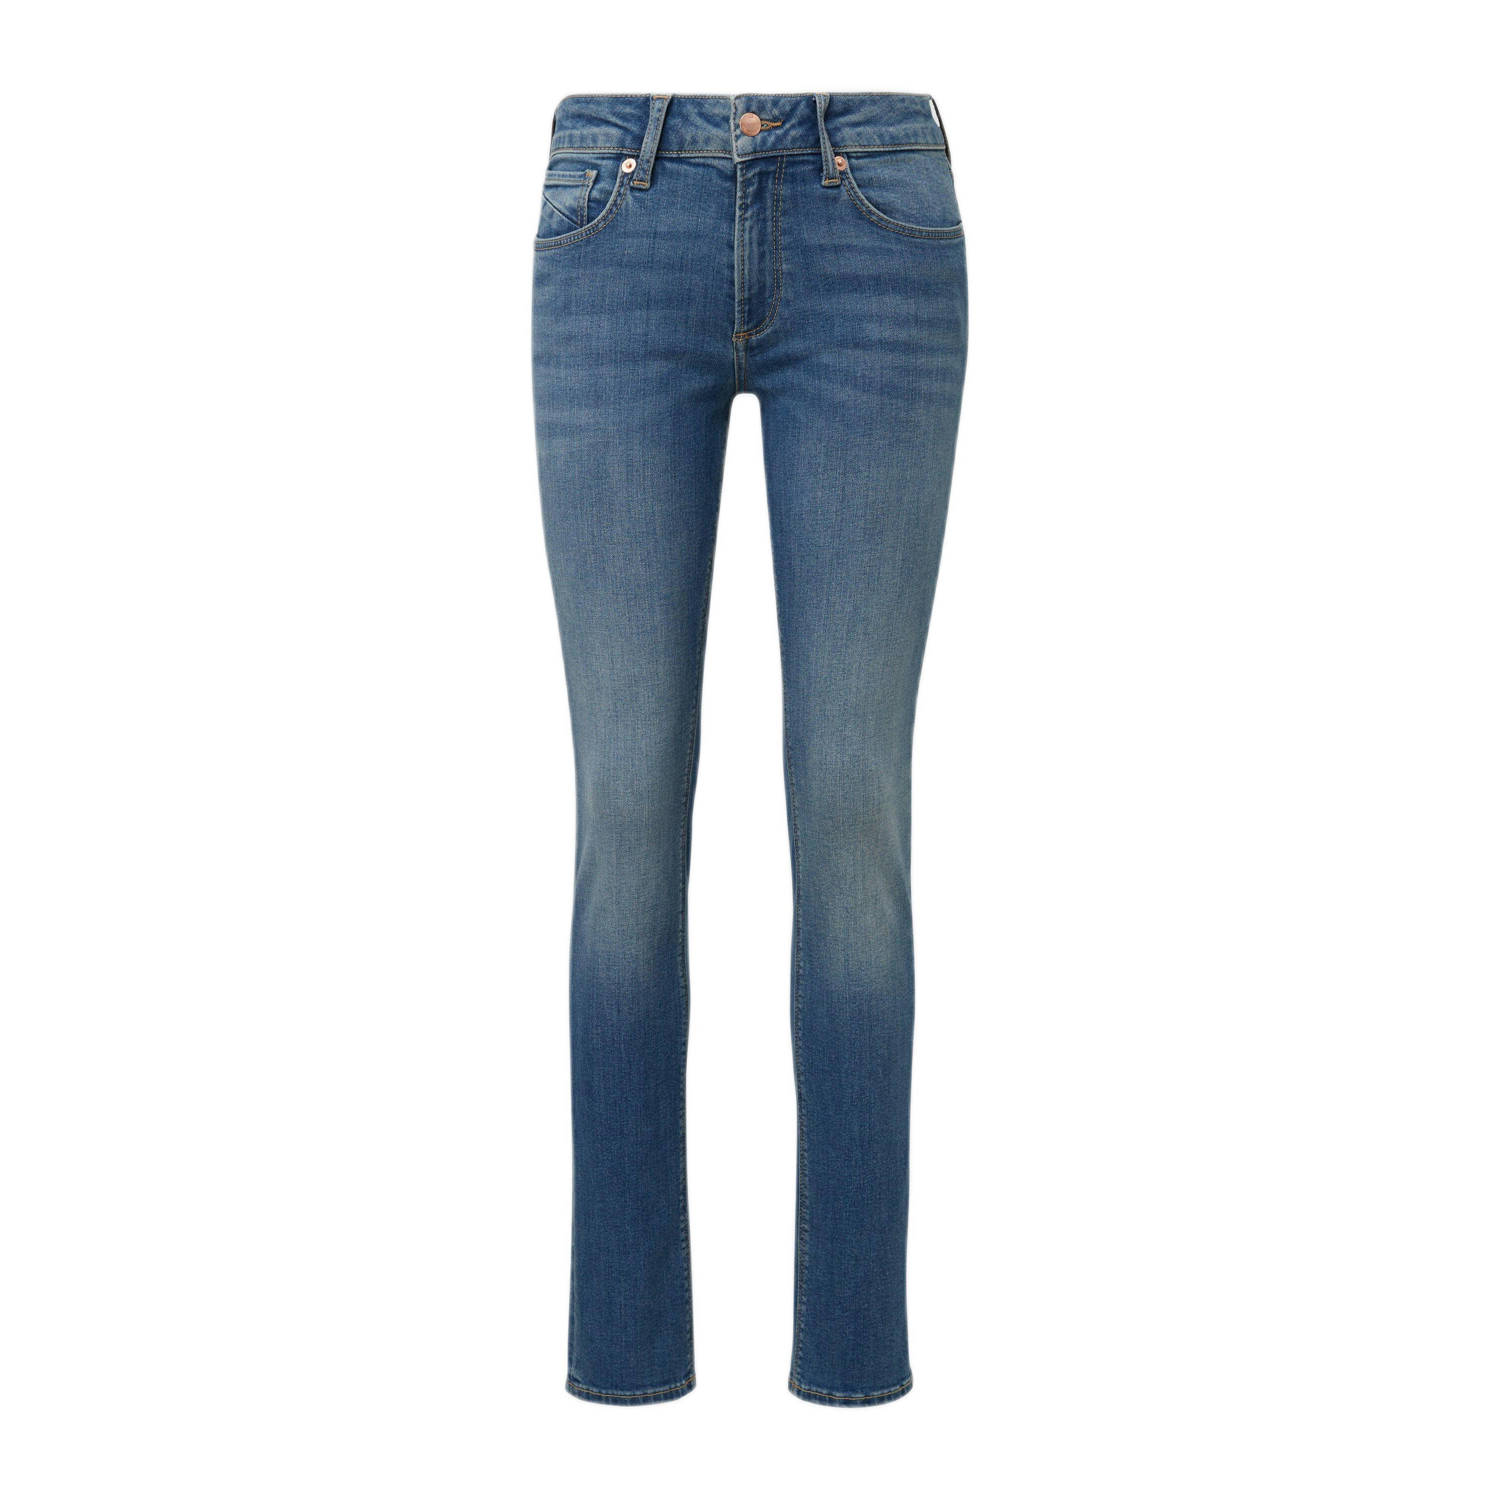 Q S by s.Oliver slim fit jeans blue